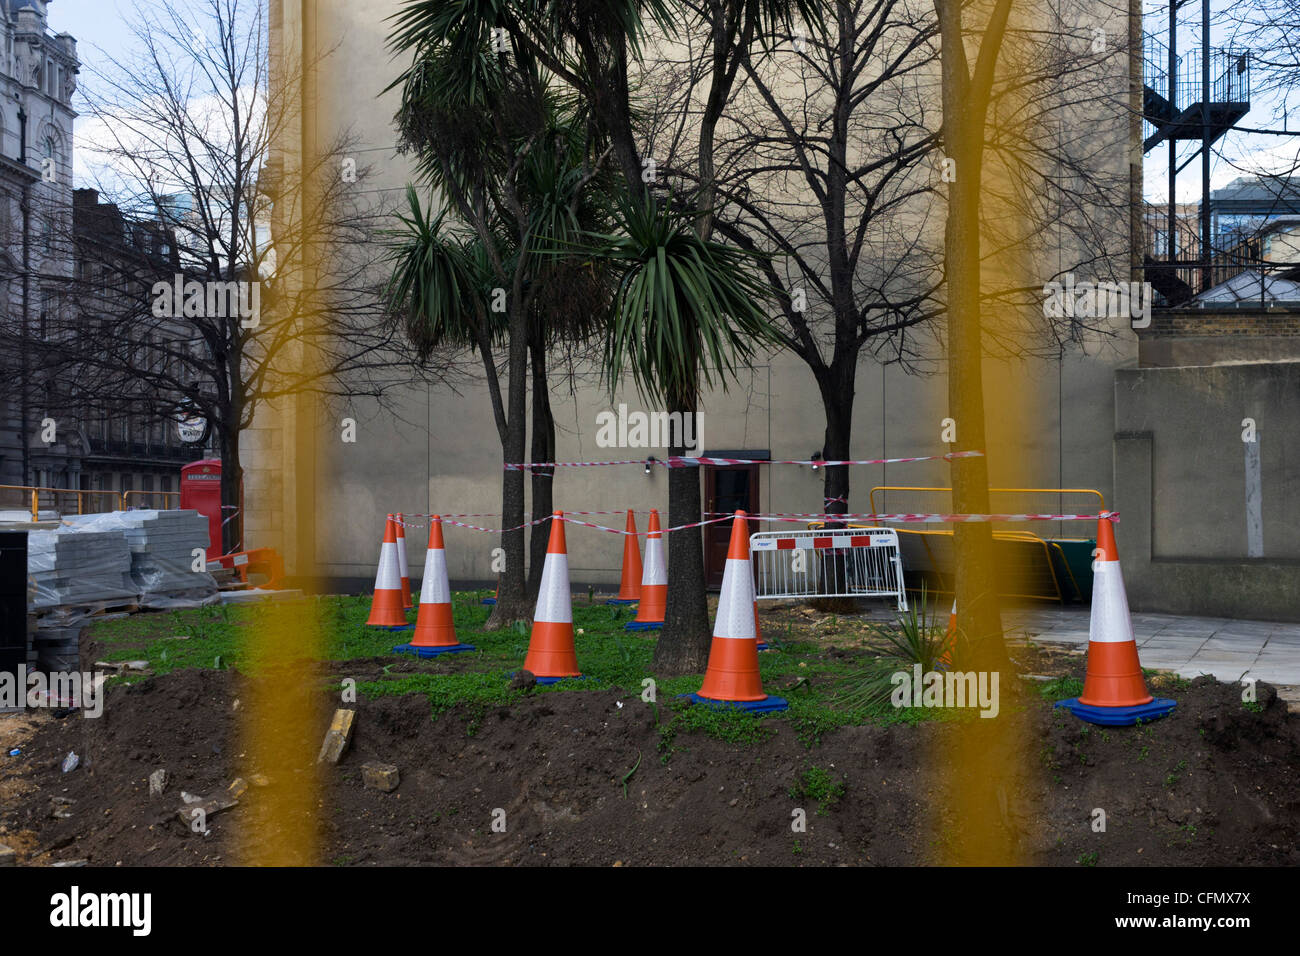 Incongruously odd landscape of traffic cones, striped tape and urban trees on construction site. Stock Photo